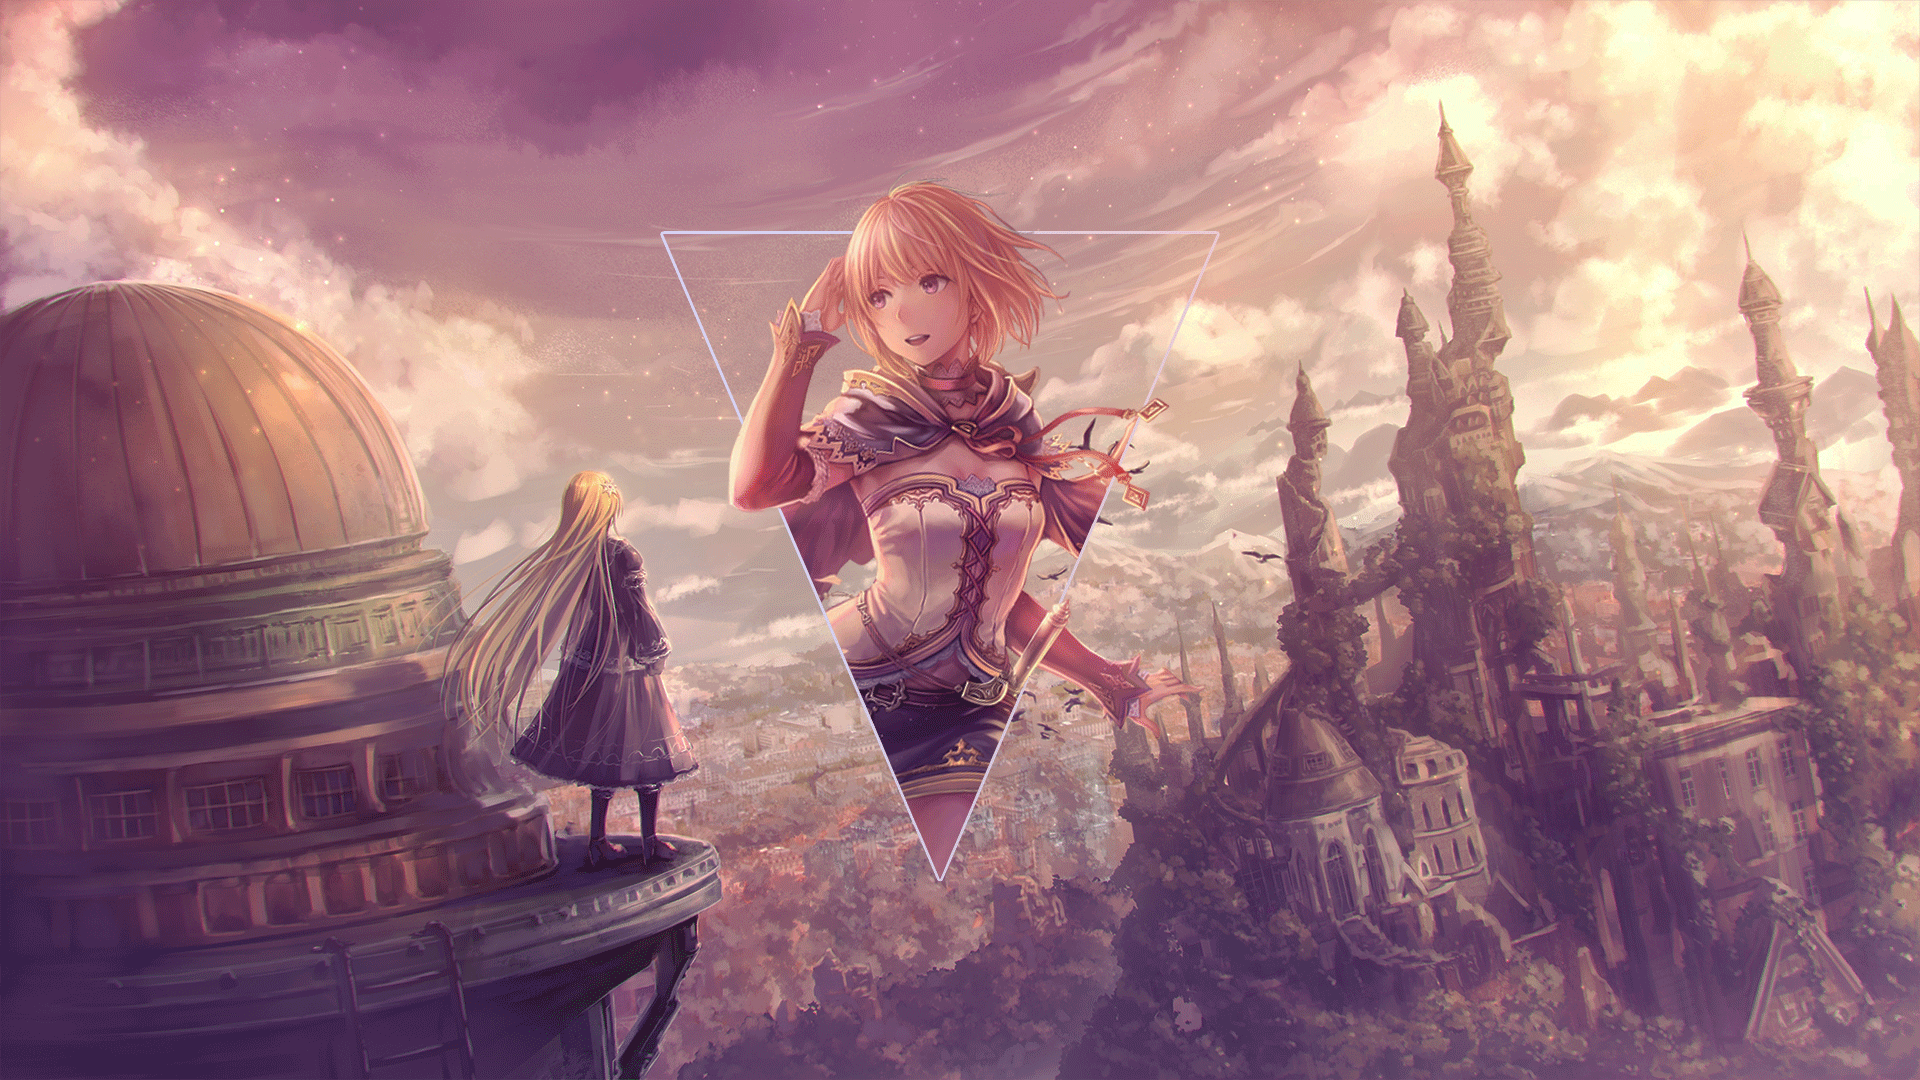 Anime 1920x1080 anime girls anime digital art picture-in-picture cityscape fantasy city